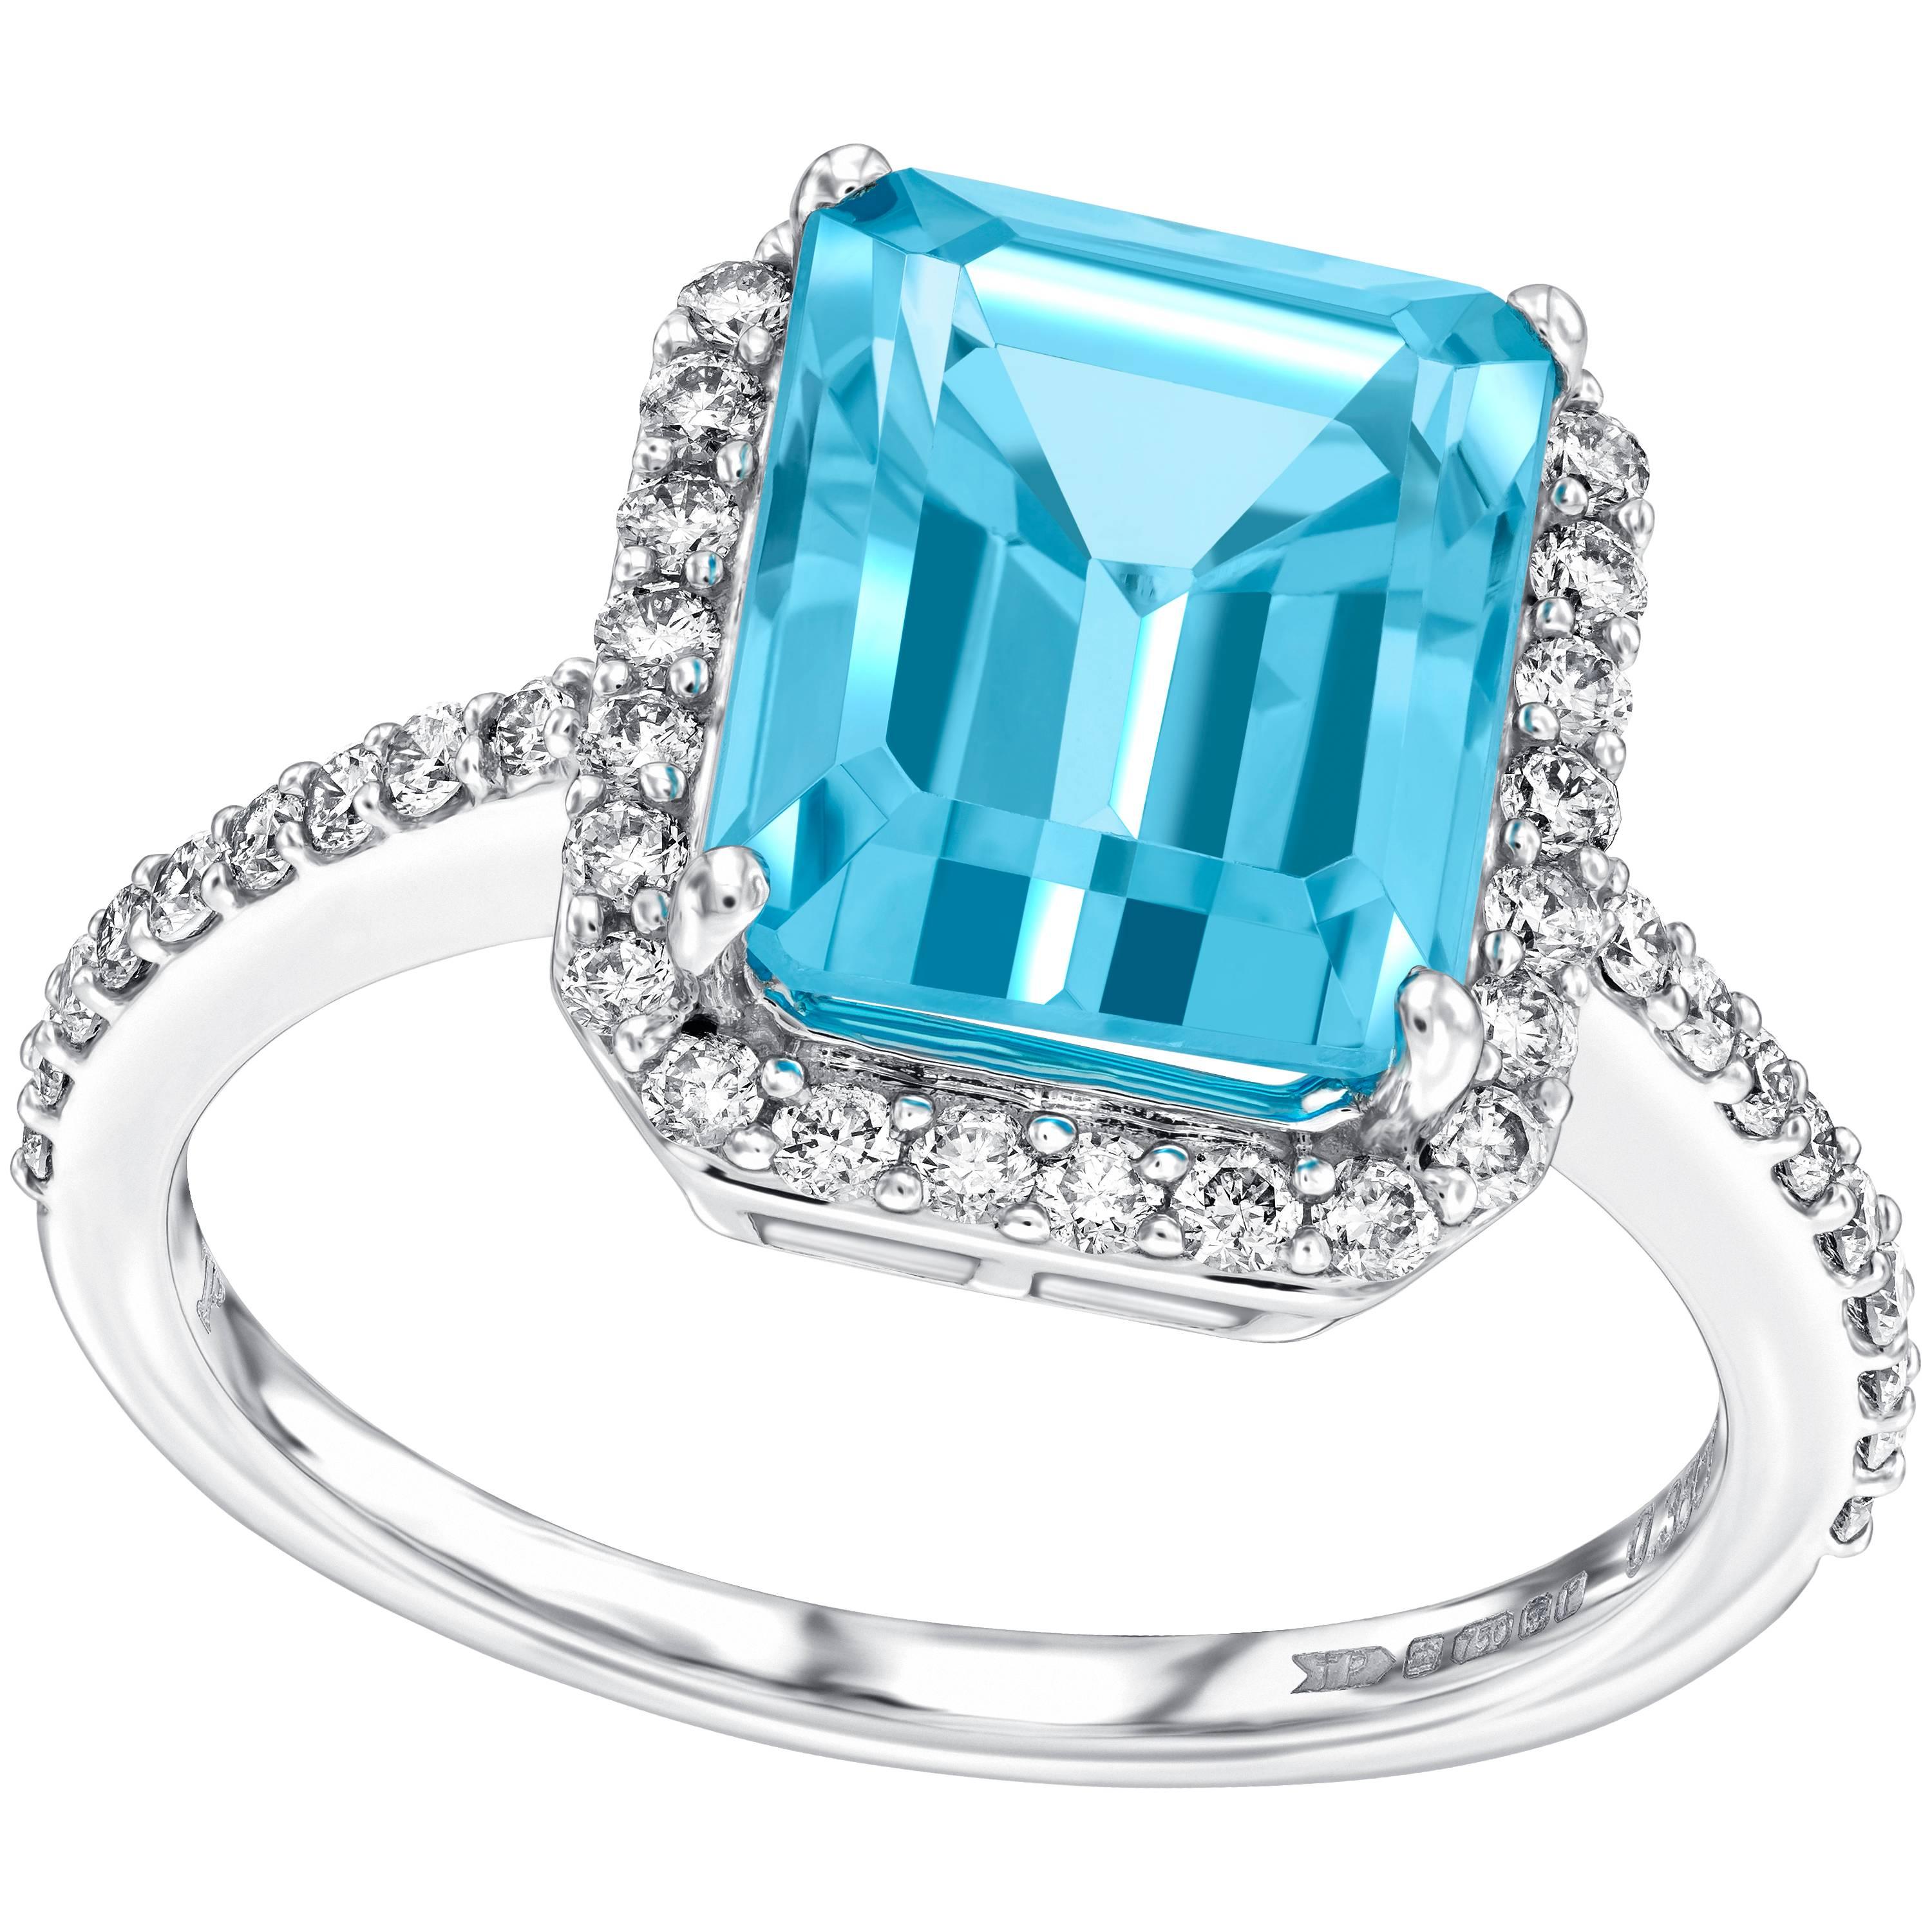 This beautiful 5.00 Carat emerald cut blue topaz engagement ring with surrounded by a pave set 0.38 carat white round brilliant diamond halo. This ring has a total gem weight of 5.38 carat. With a quality grading of H-SI, the weight of the ring is